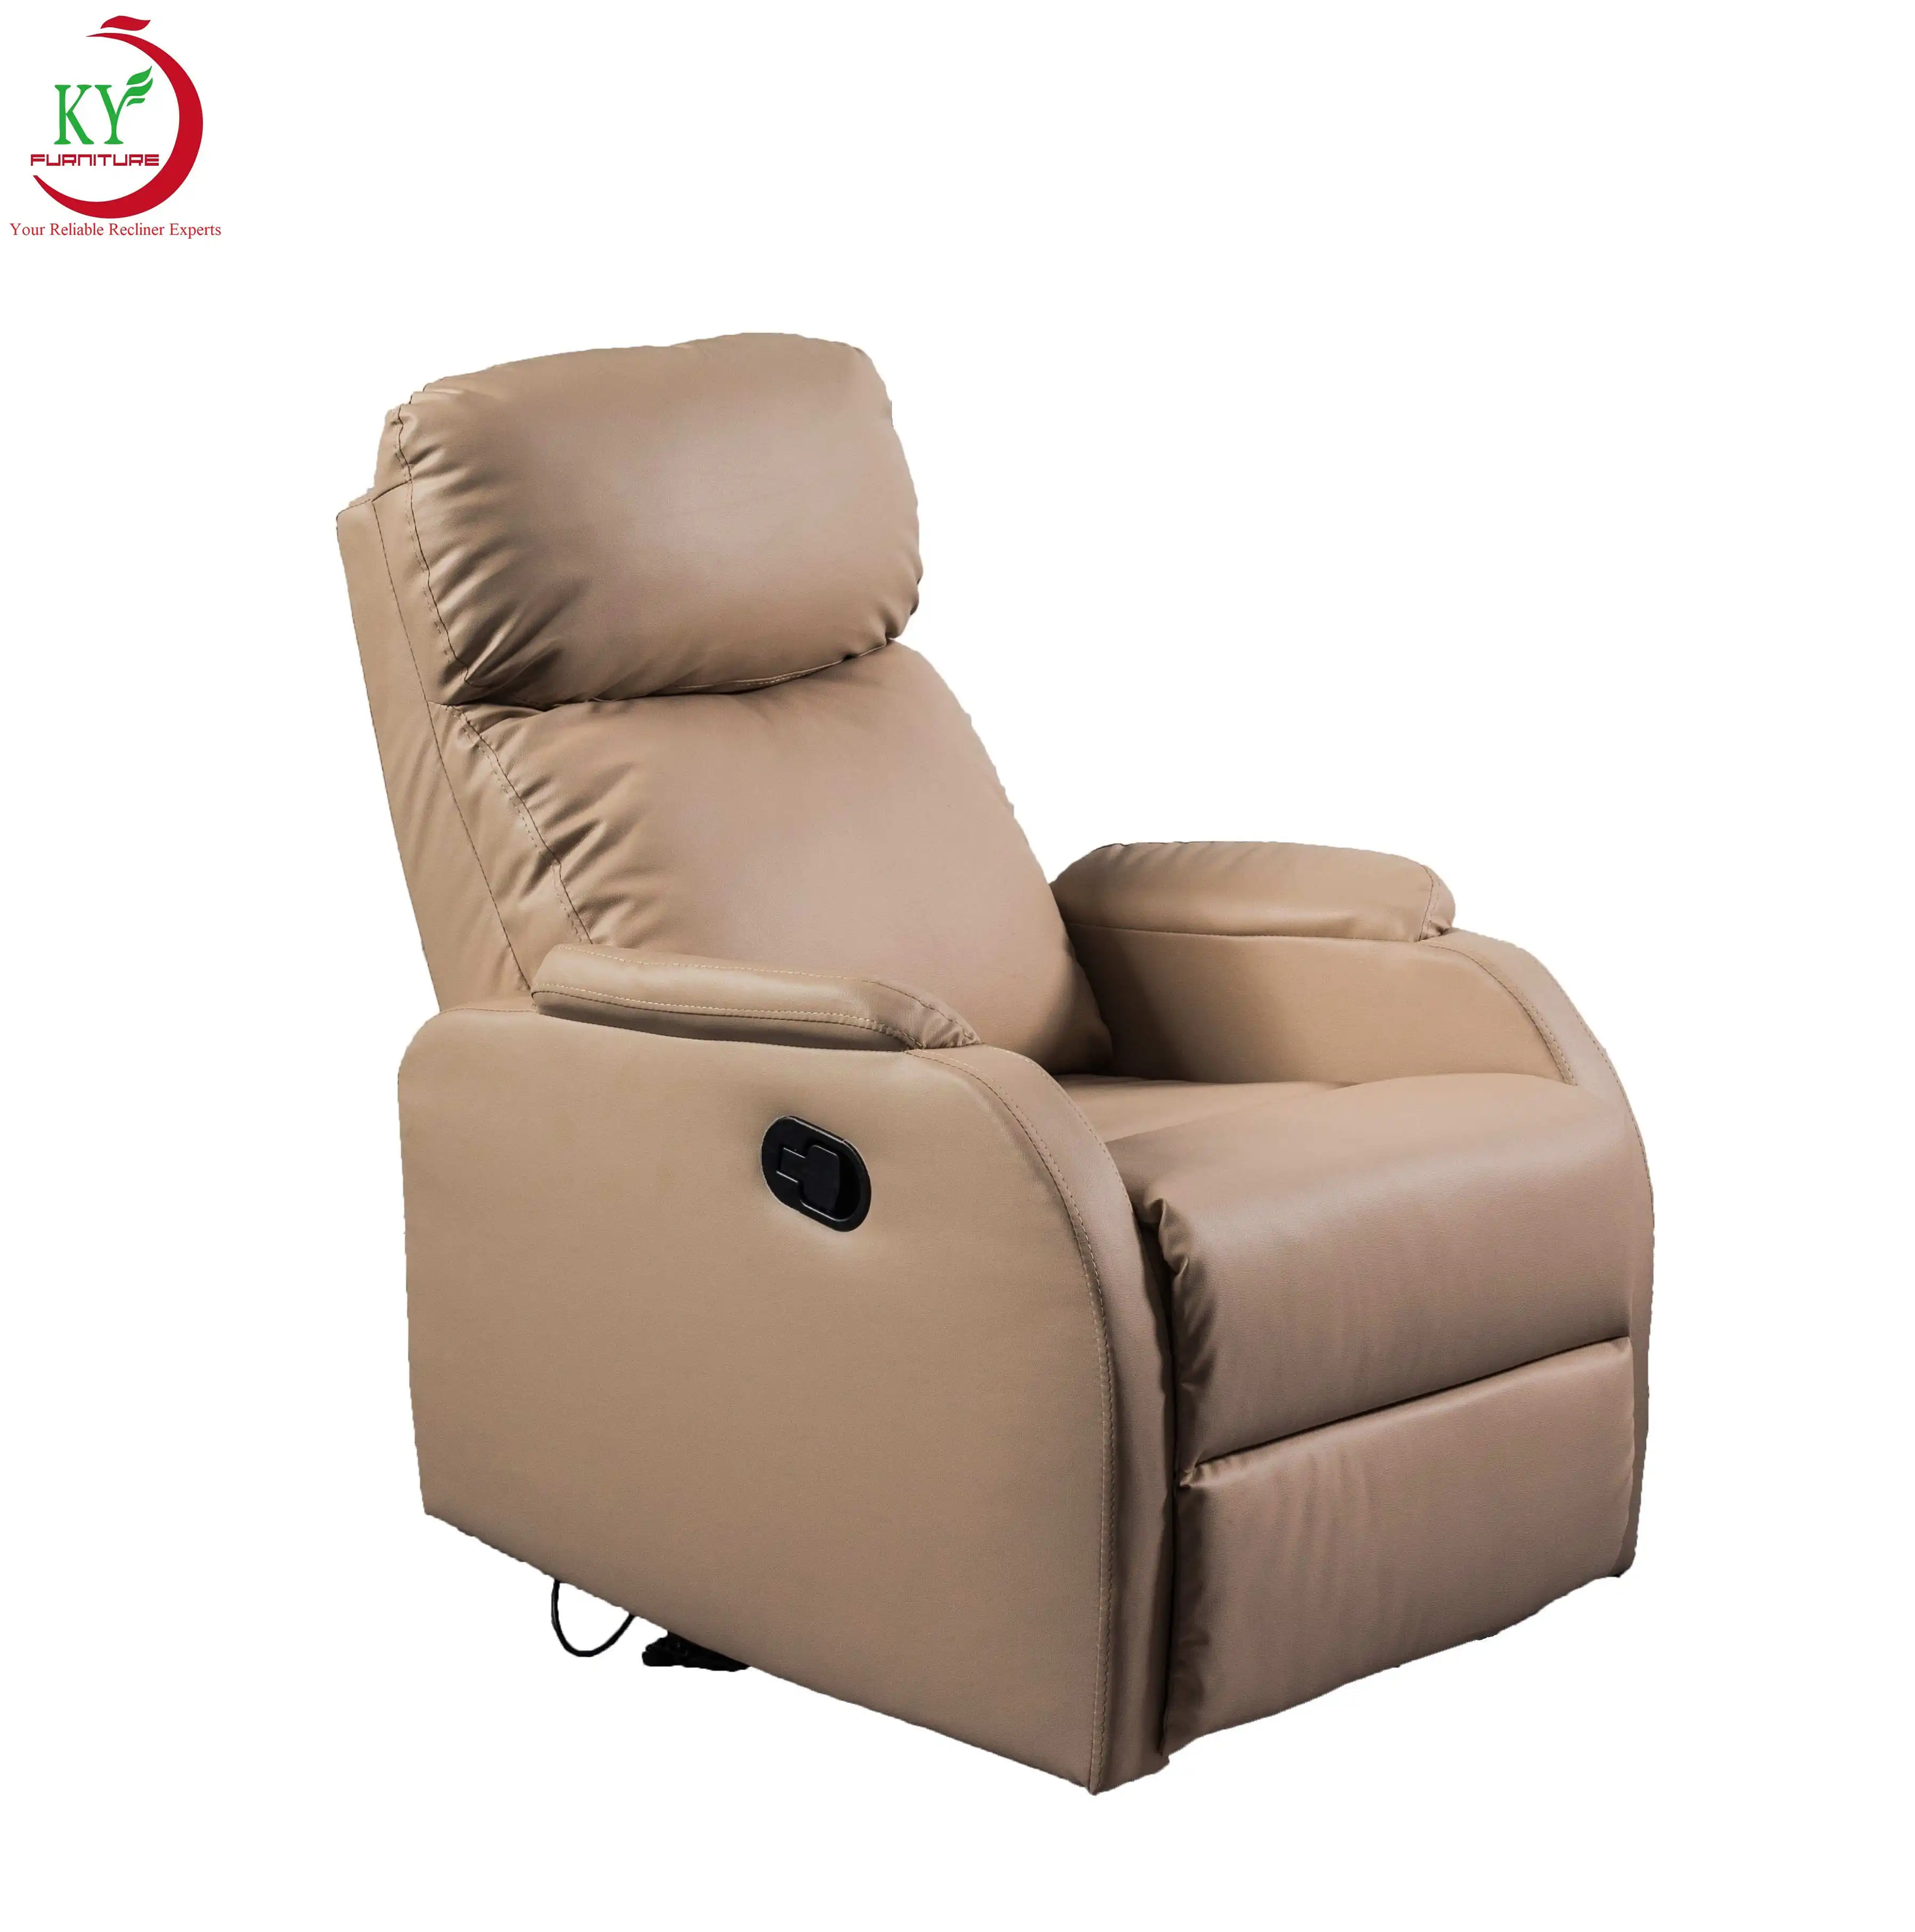 

JKY Furniture Small Size China Factory PU Leather Manual Recliner Sofa Chair